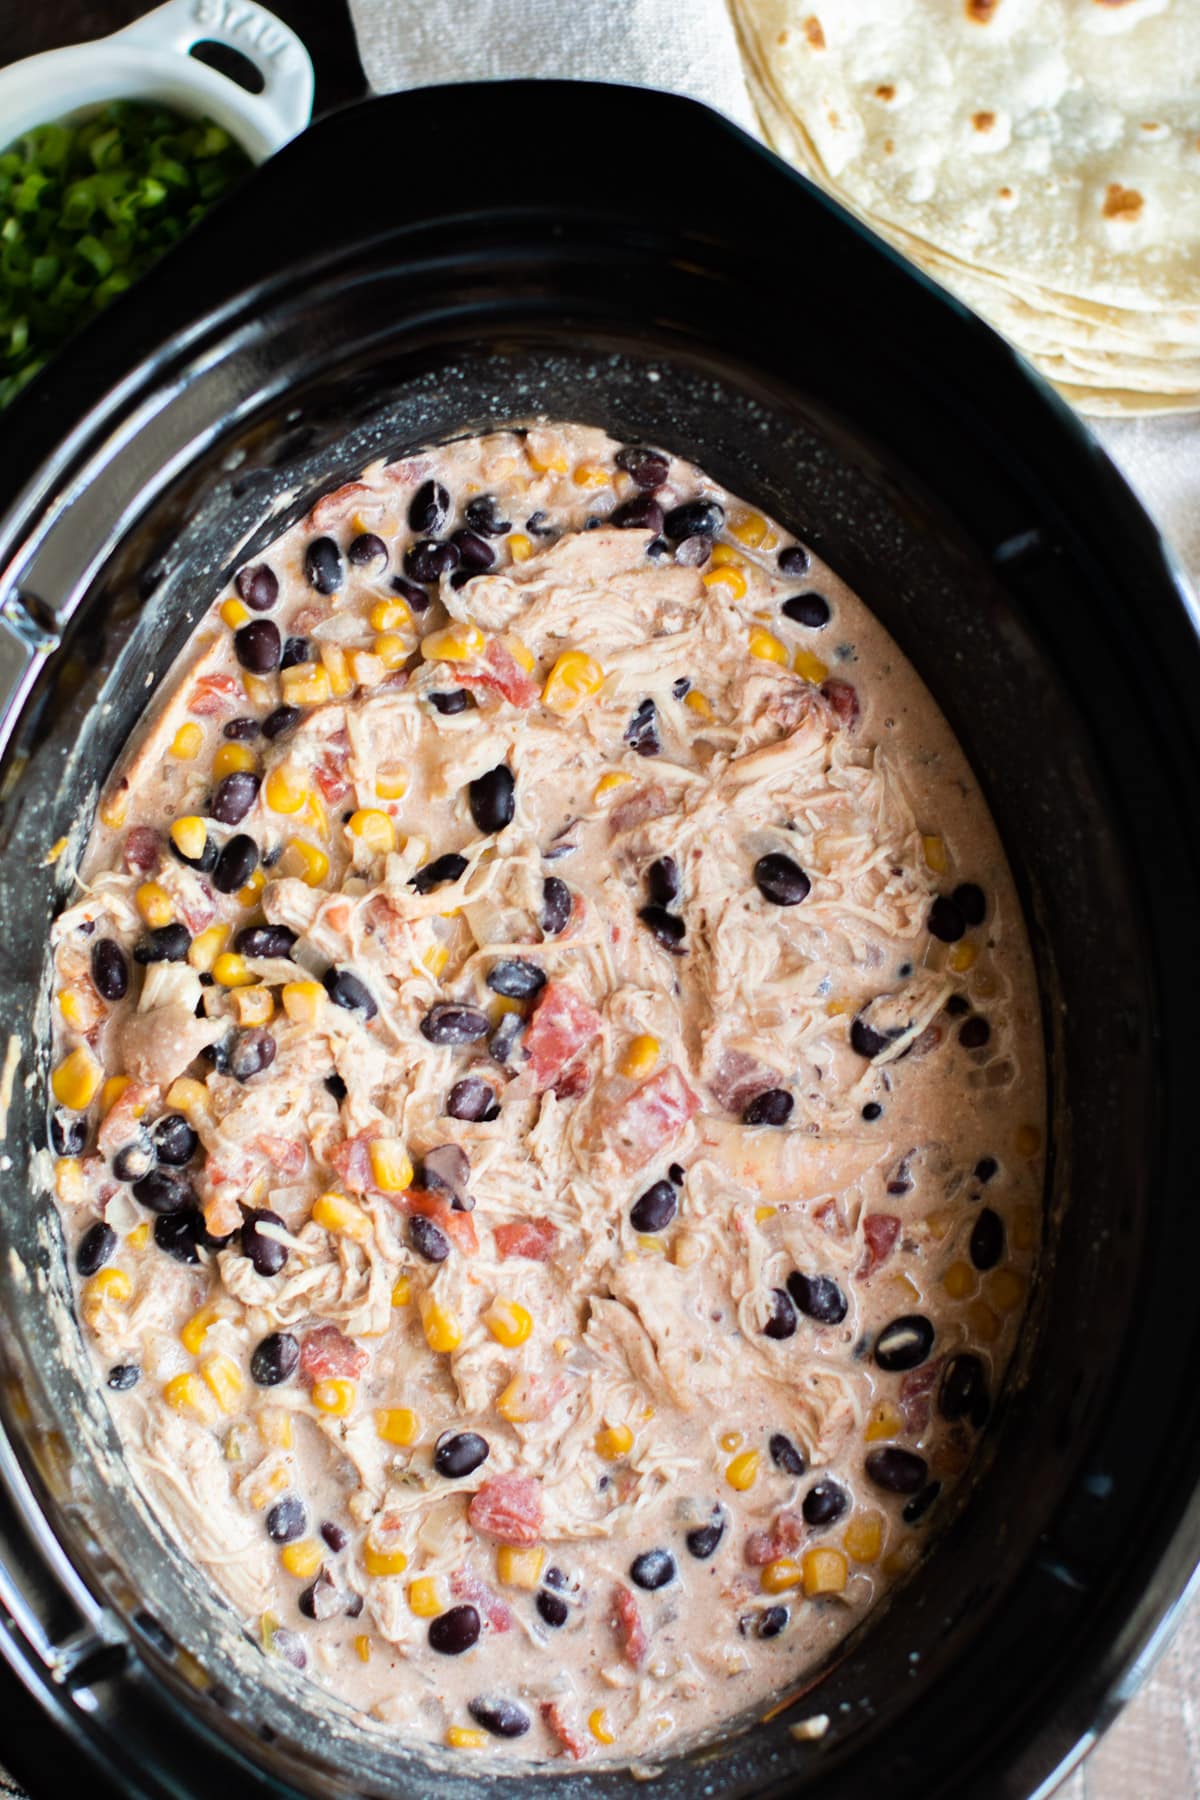 Shredded fiesta chicken with corn and black beans